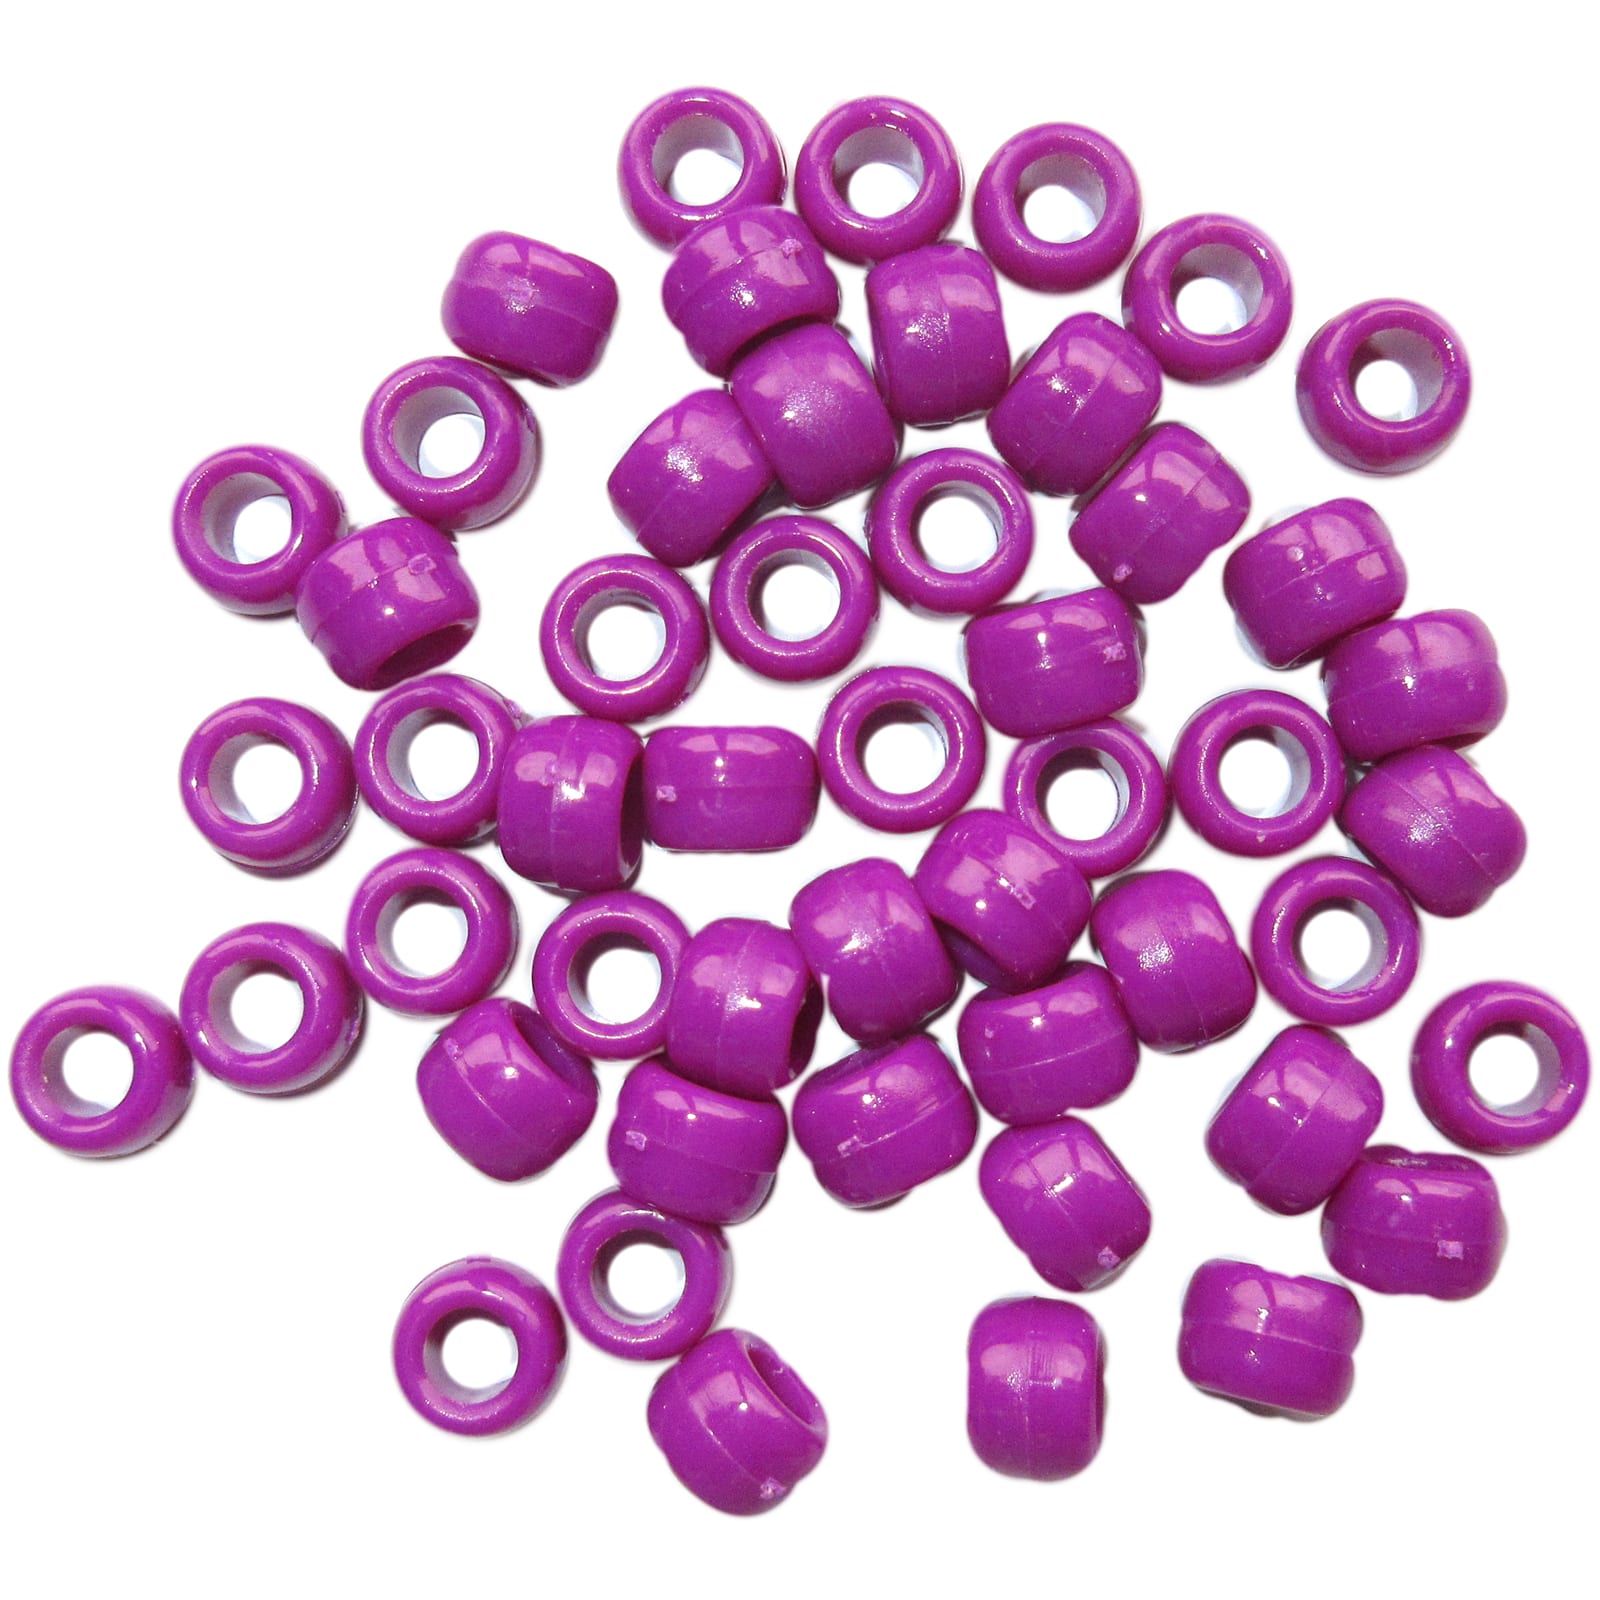 Opaque Pony Beads by Creatology™, 6mm x 9mm, Michaels